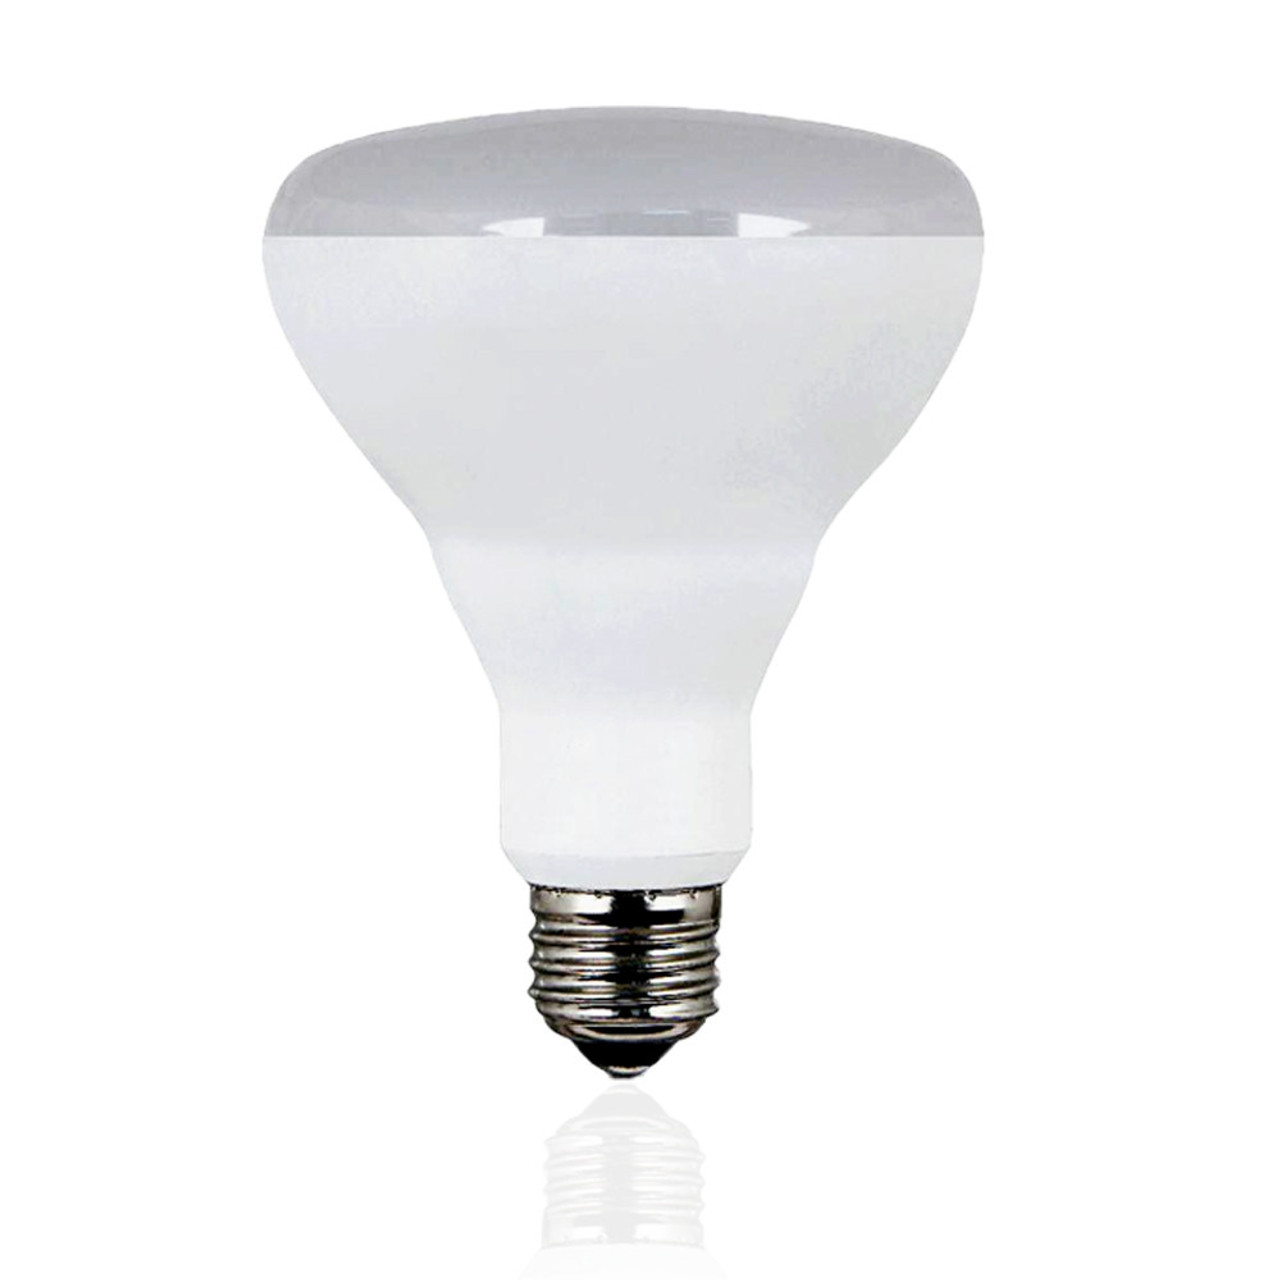 4000K LED BR30 11 Watt (65W Replacement) Cool White, 120